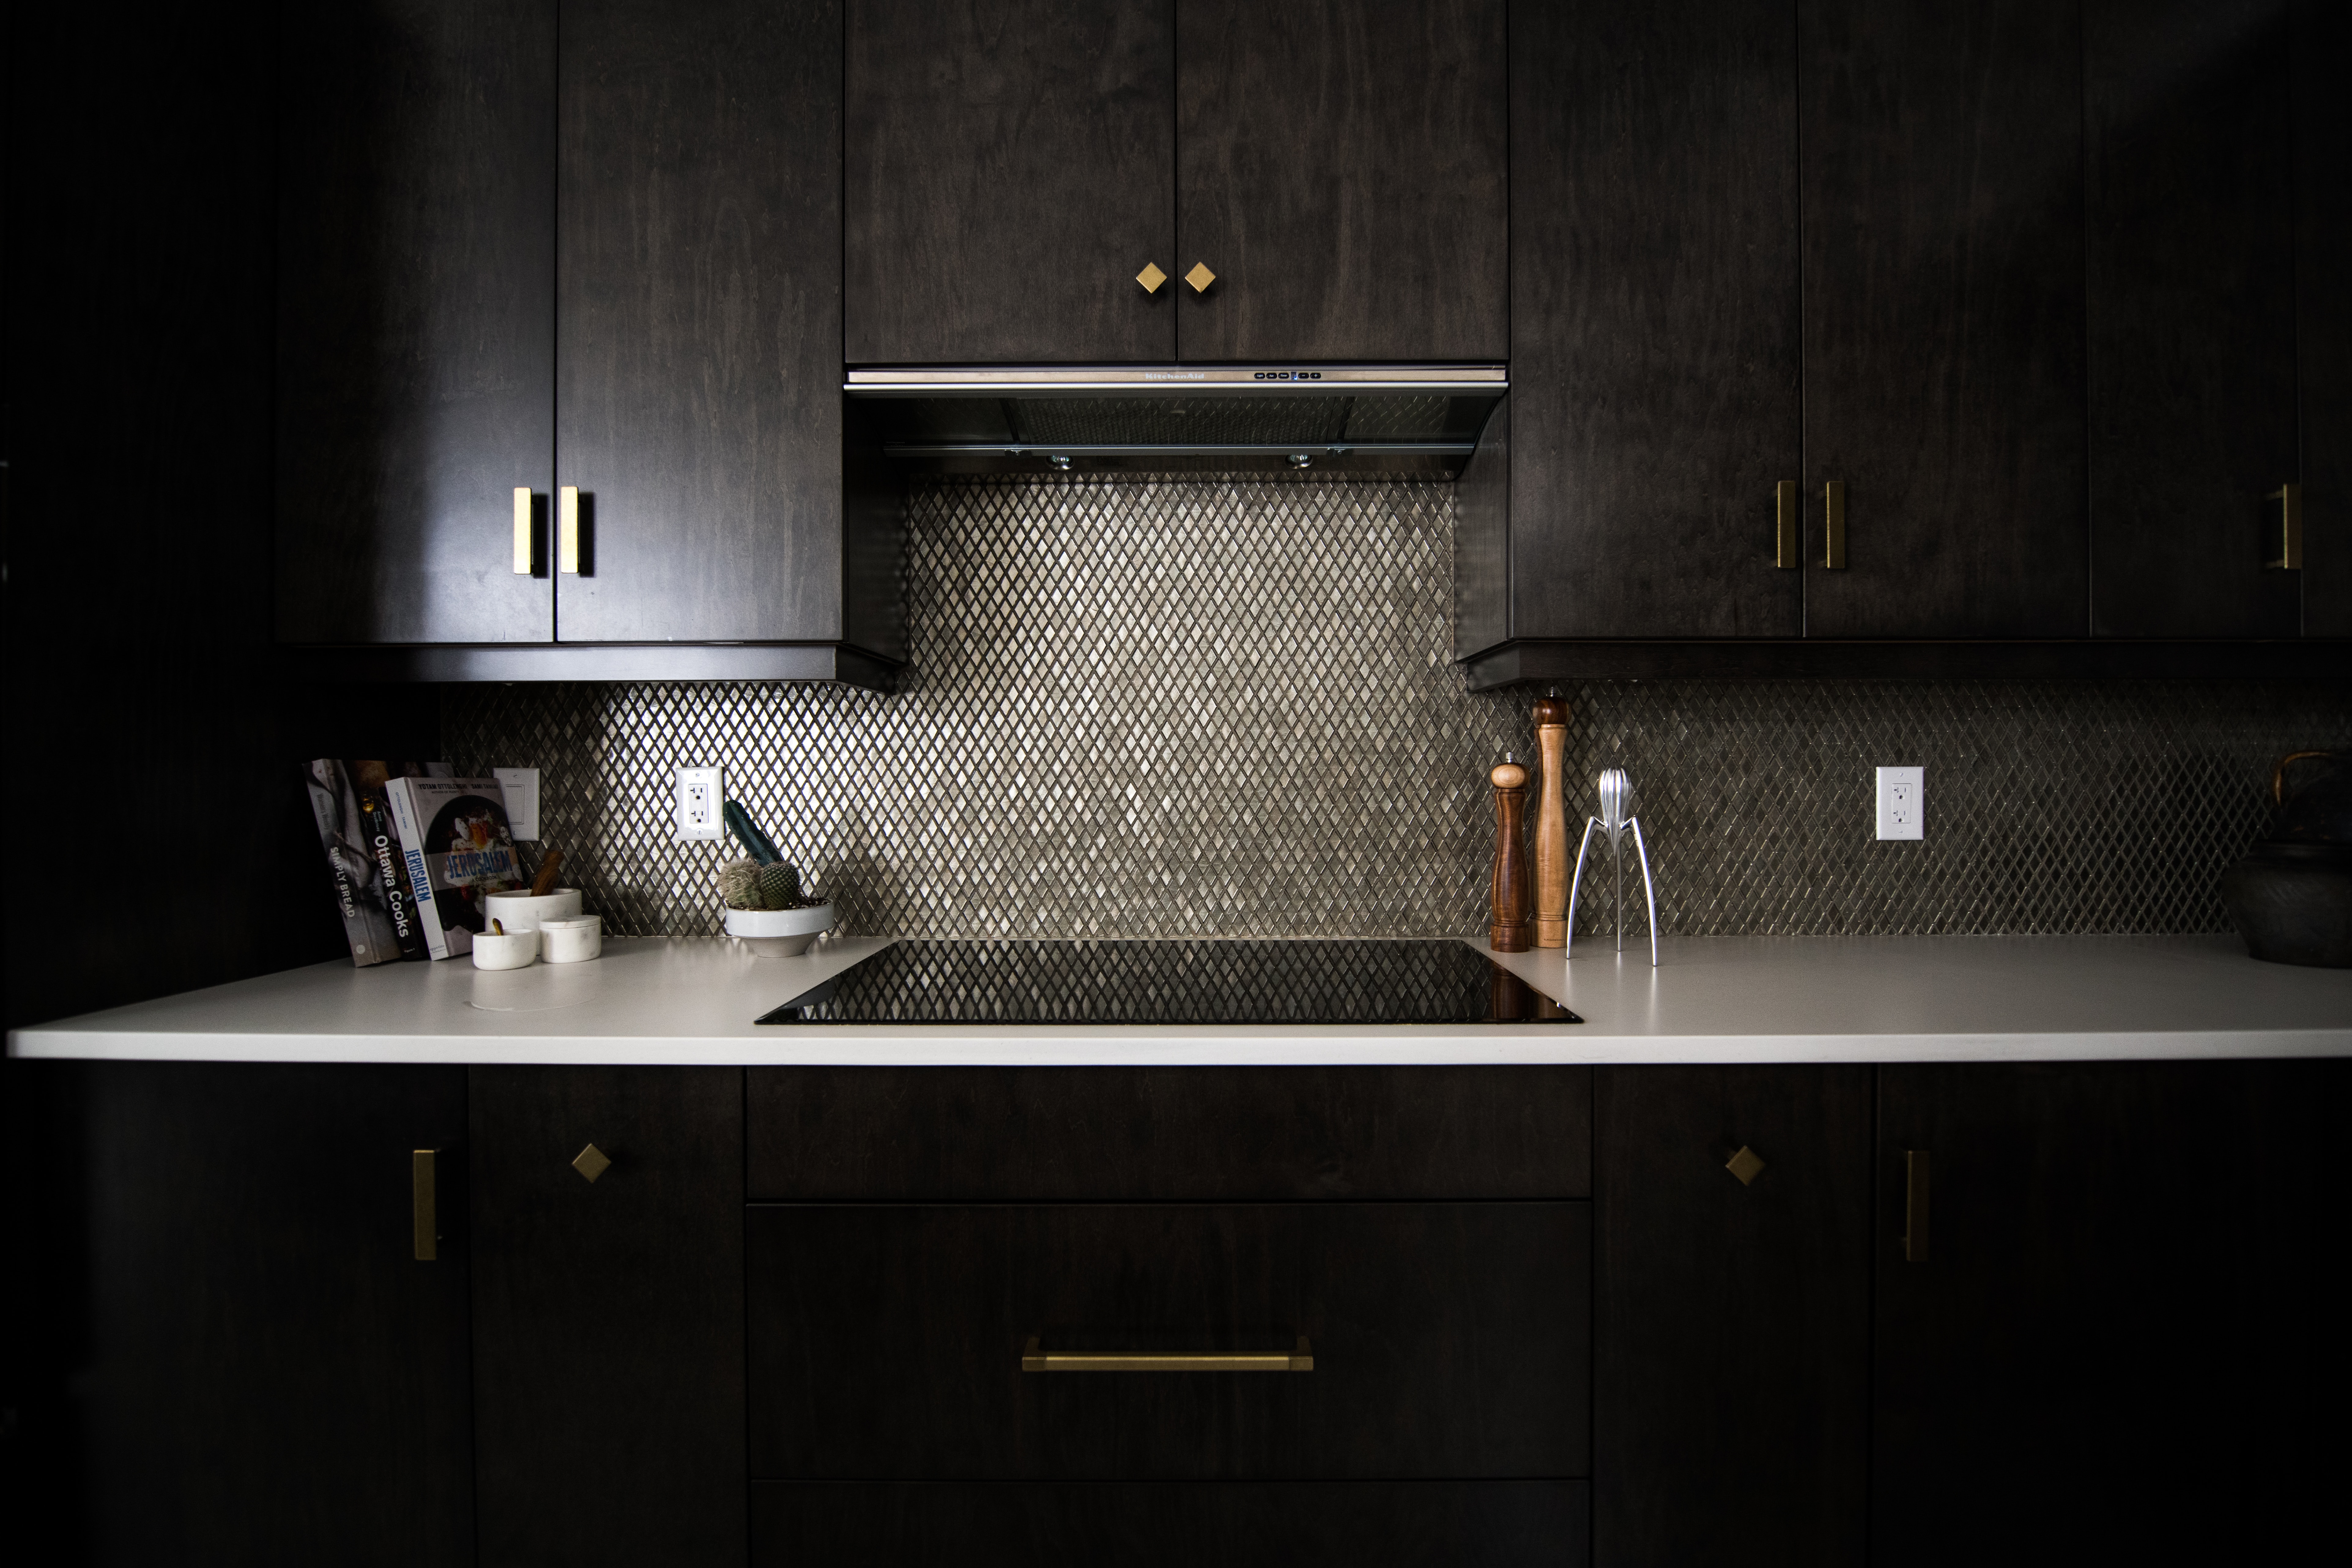 Consider black countertops with gold detailing for a classic and sophisticated look. Pictured: A black countertop with gold features.